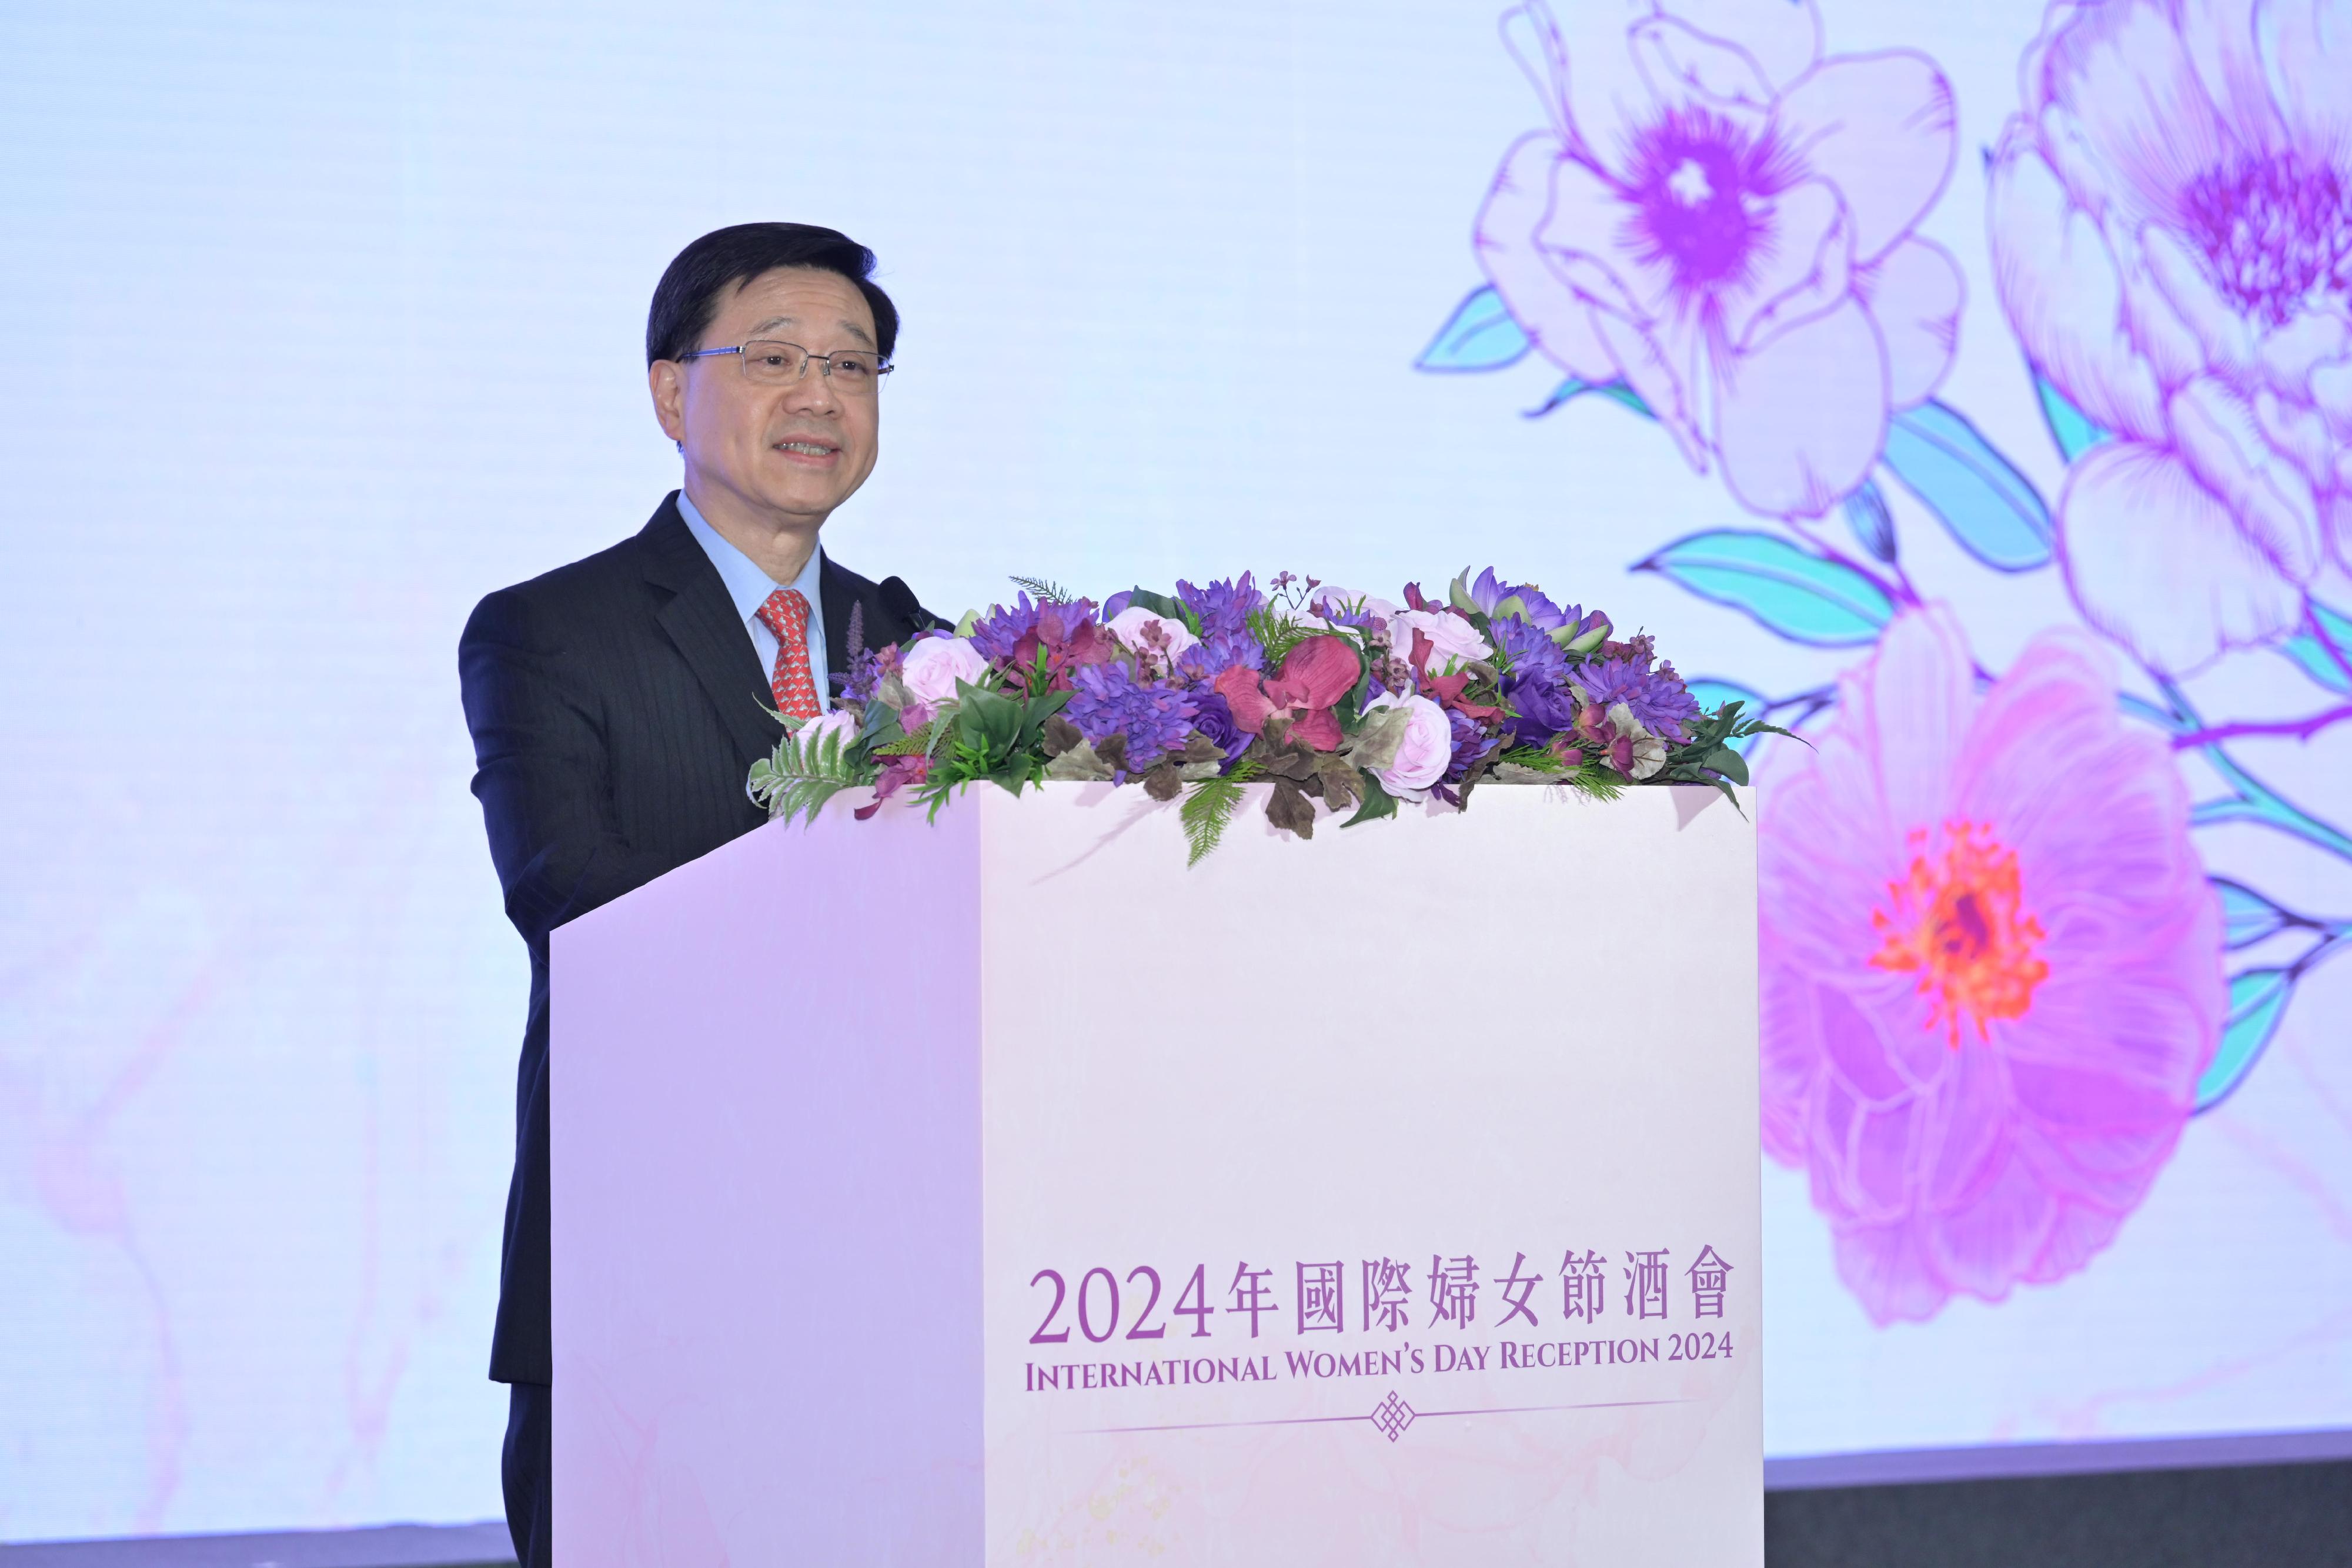 The Chief Executive, Mr John Lee, speaks at the International Women's Day Reception 2024 today (March 8).